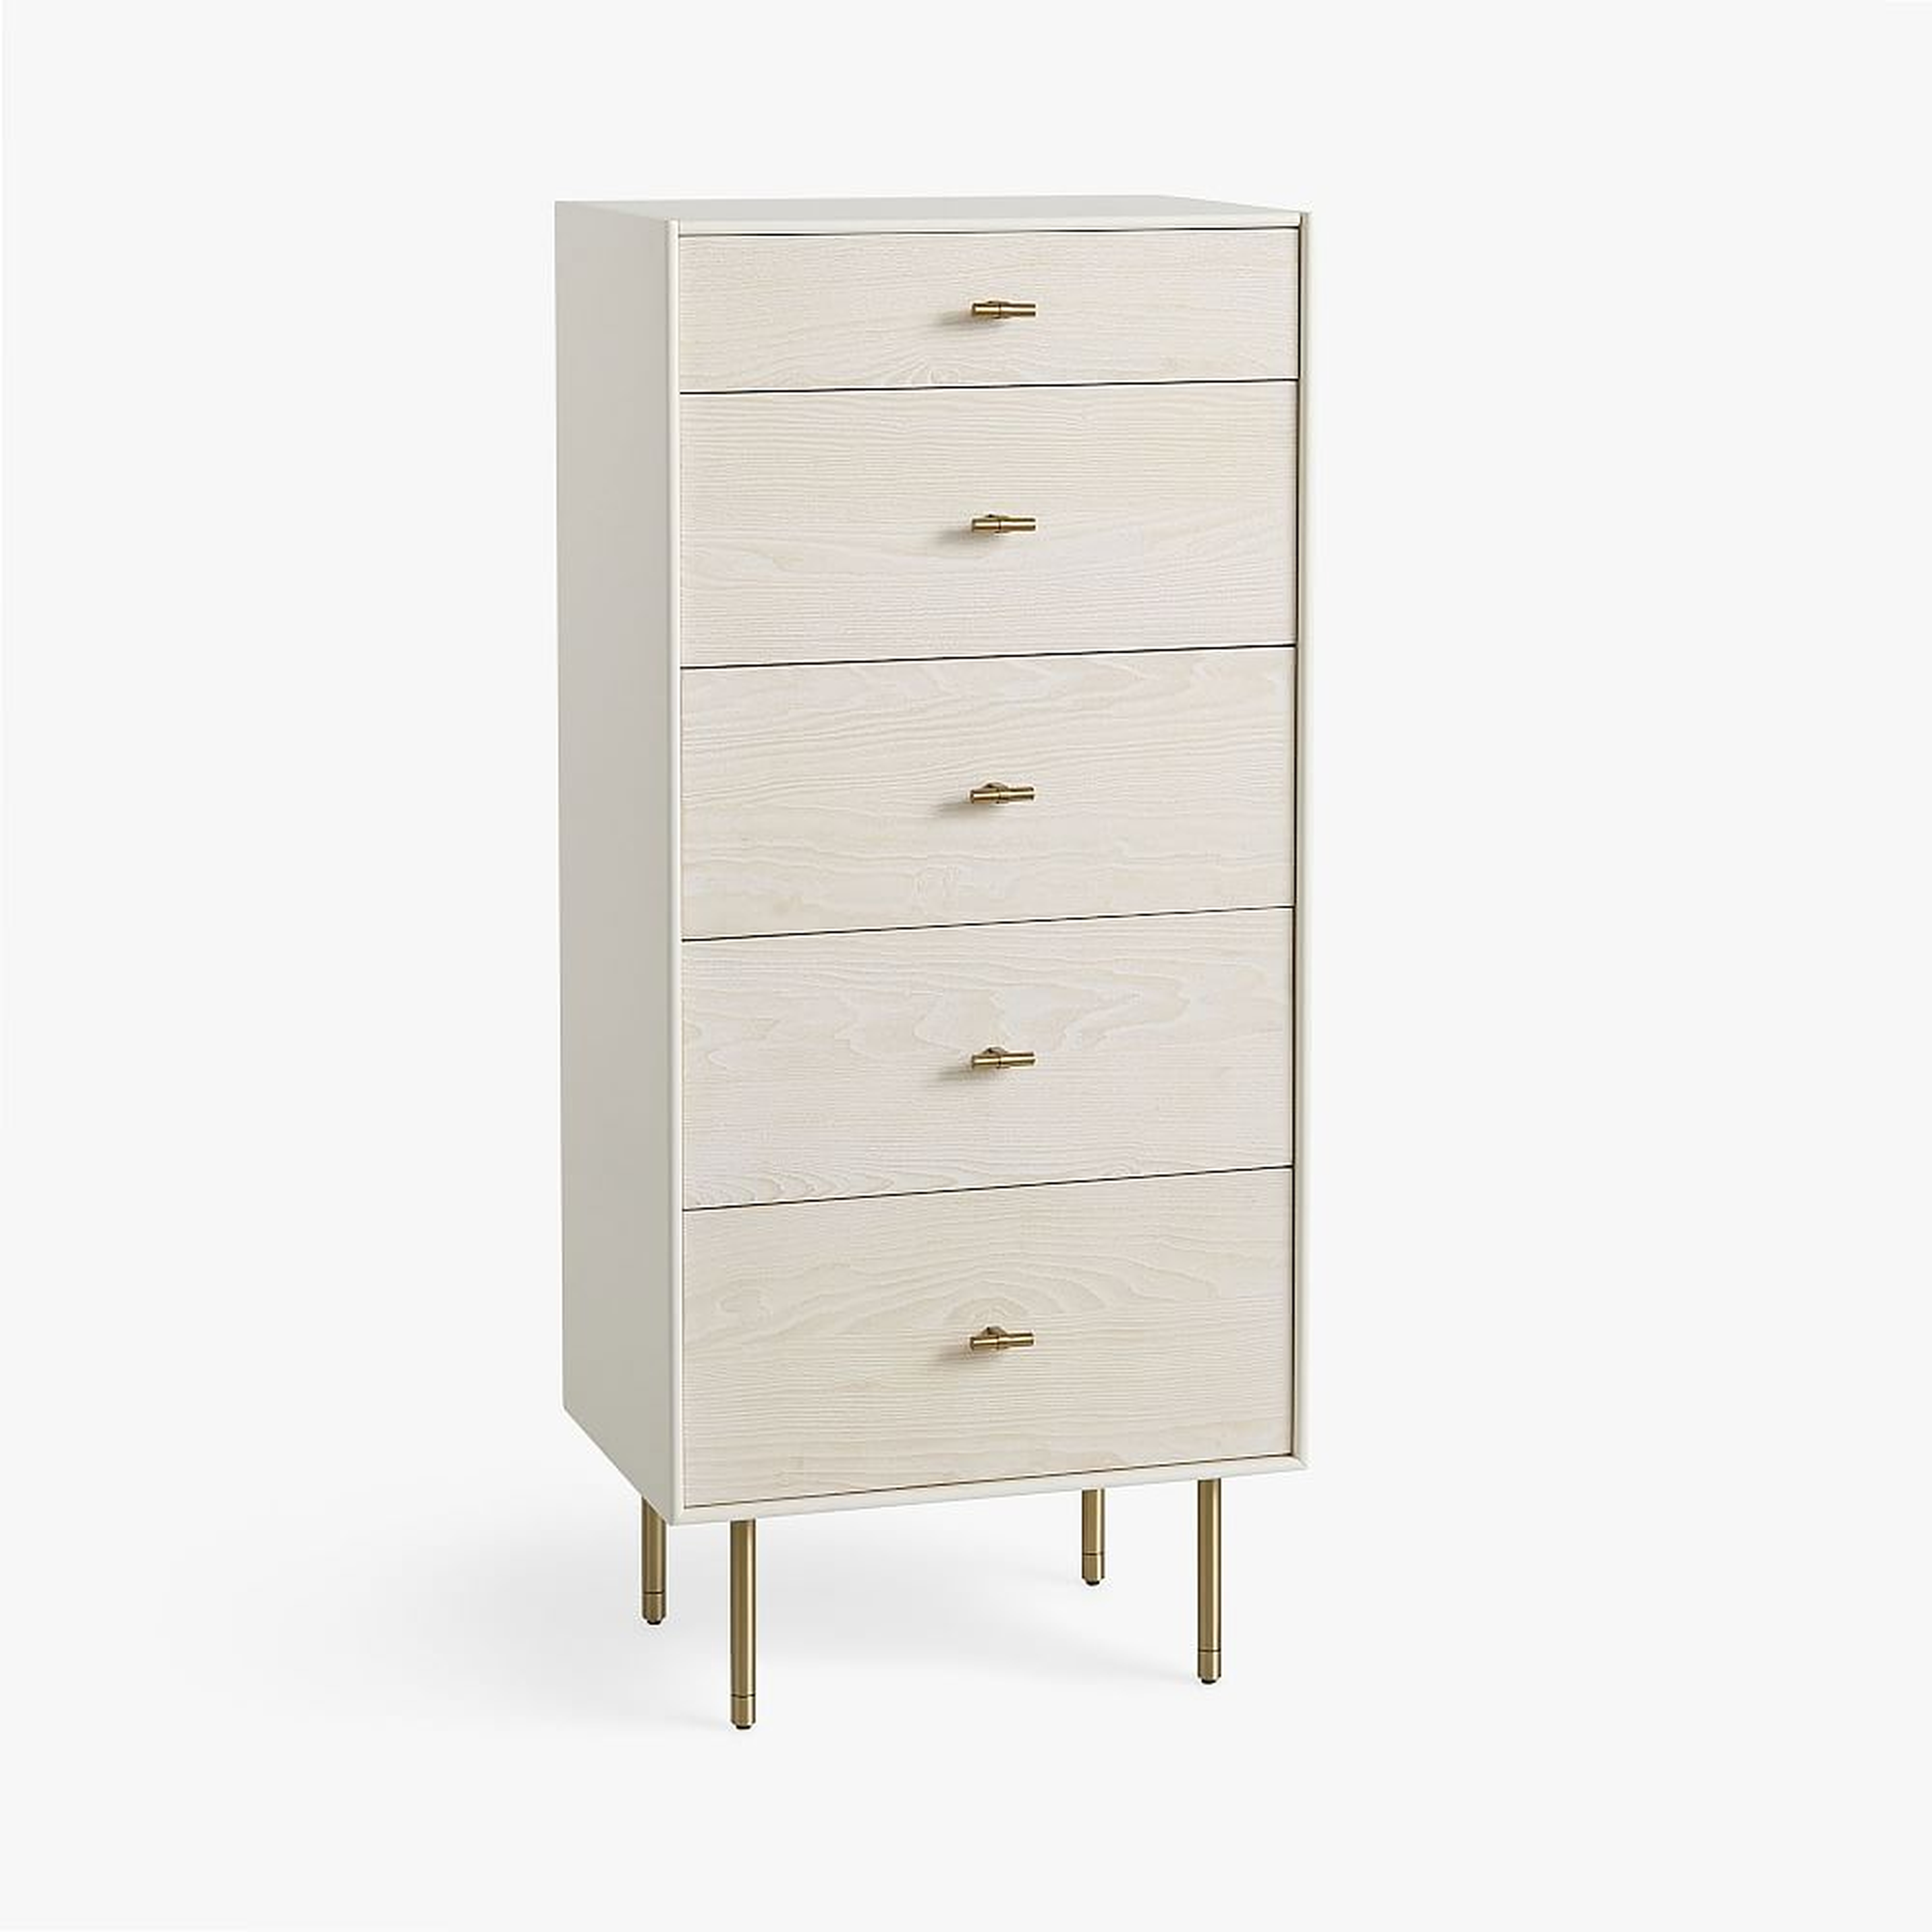 west elm x pbt Modernist 4-Drawer Dresser with Jewelry Storage, White/Wintered Wood - Pottery Barn Teen